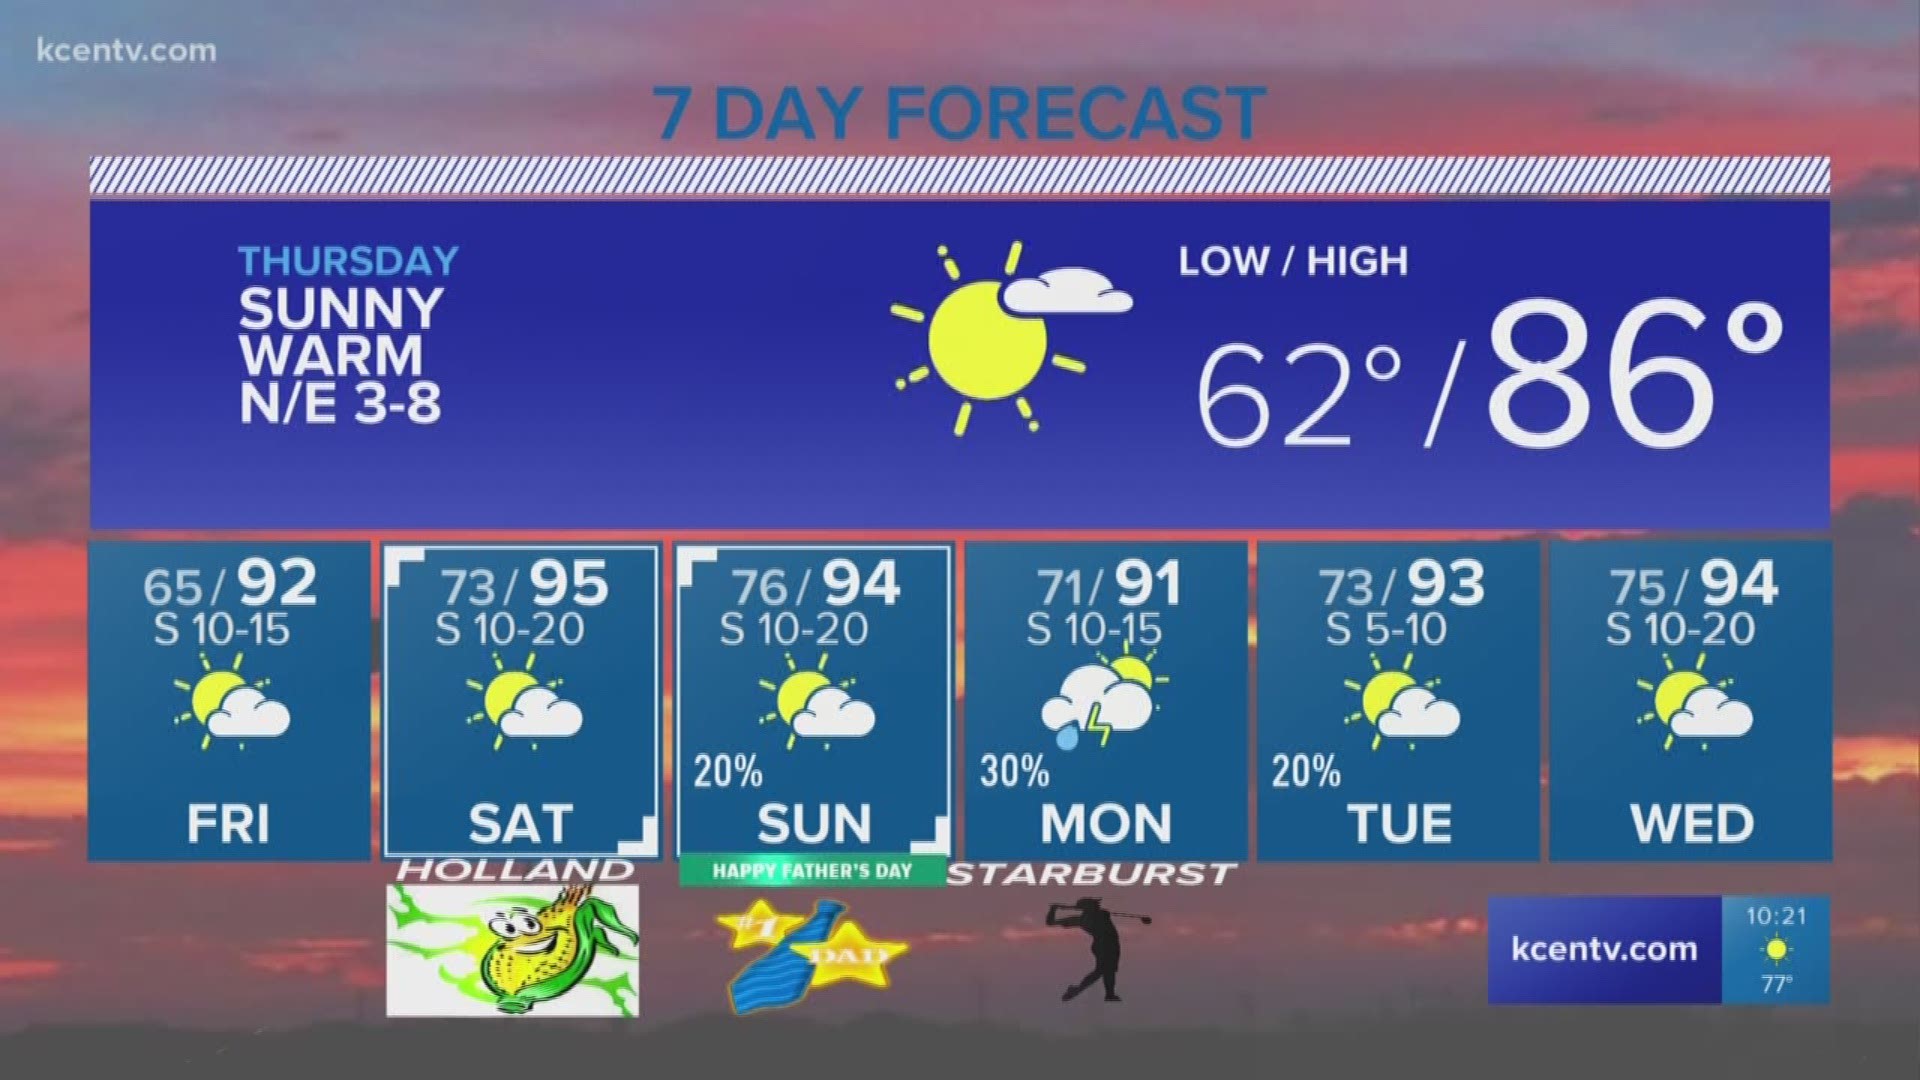 Chief meteorologist Andy Andersen says Thursday's high is 86 degrees.